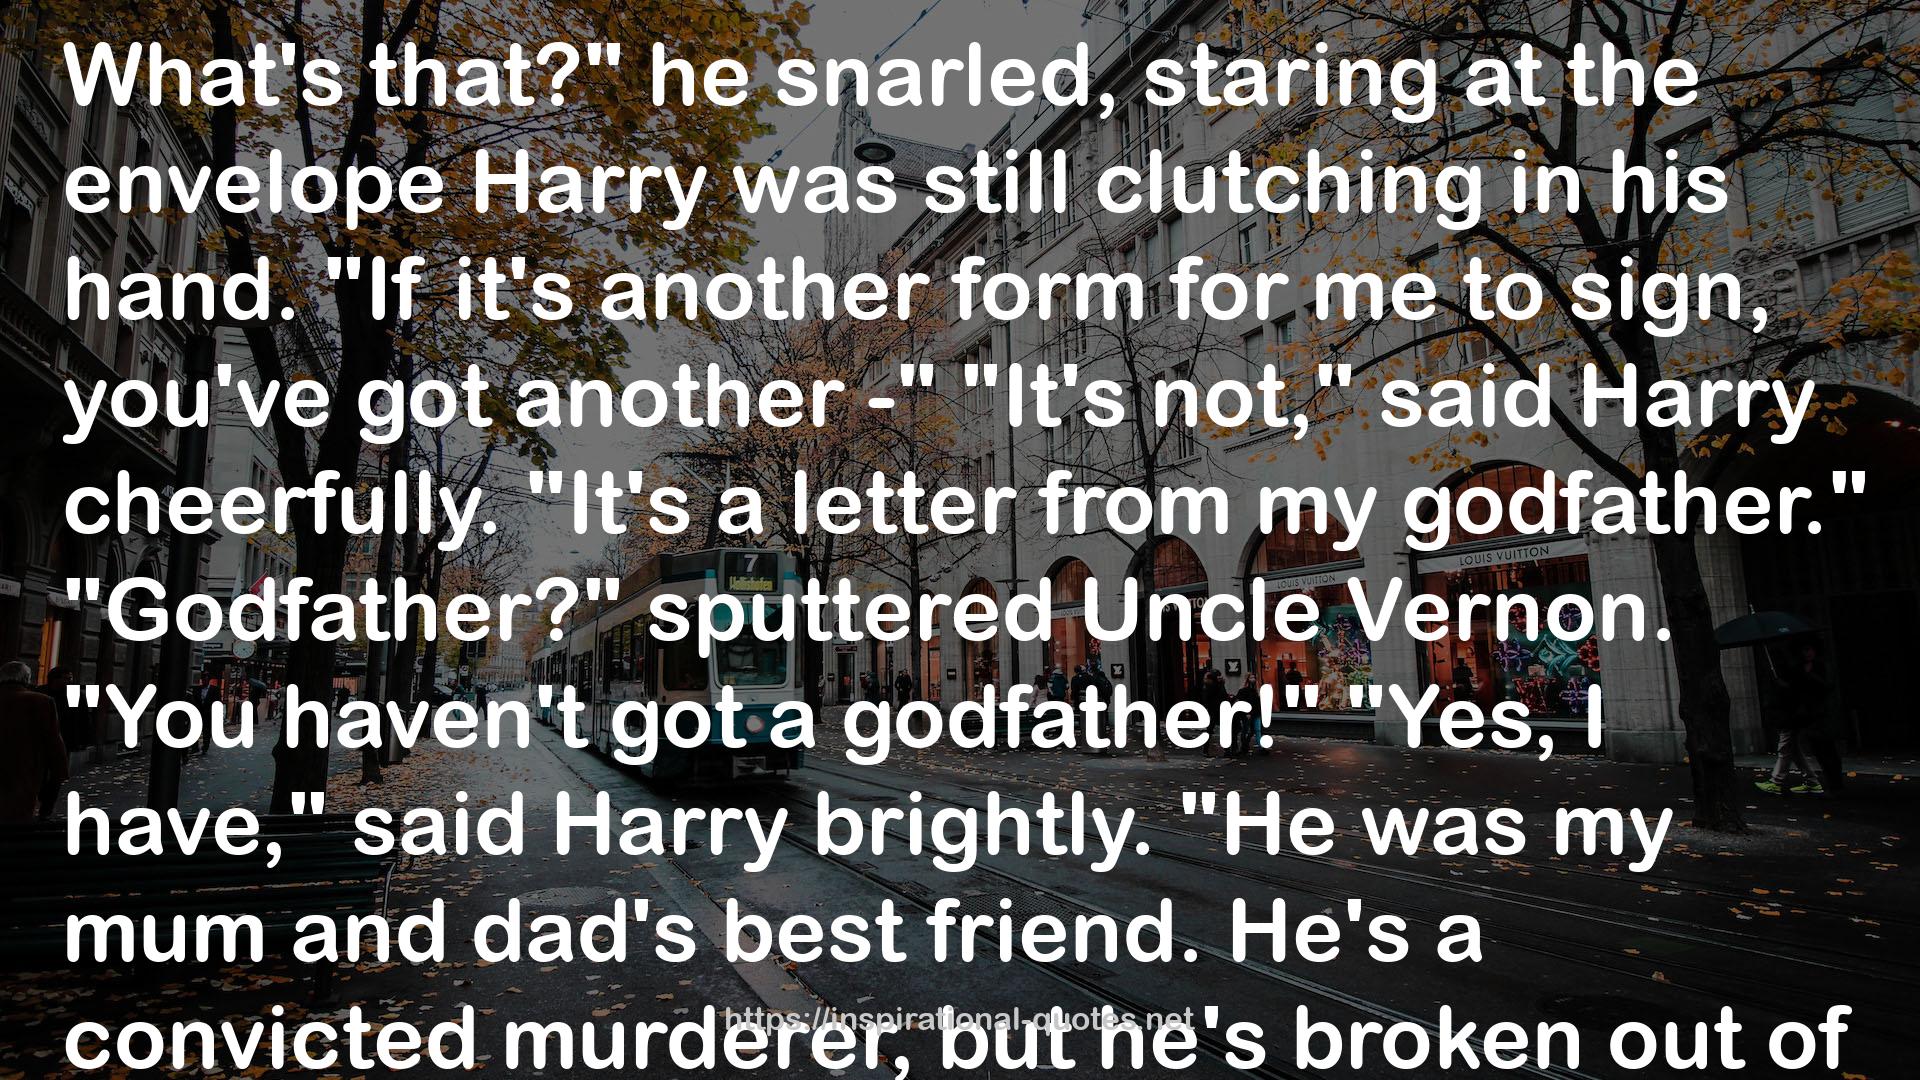 Harry Potter and the Prisoner of Azkaban (Harry Potter, #3) QUOTES